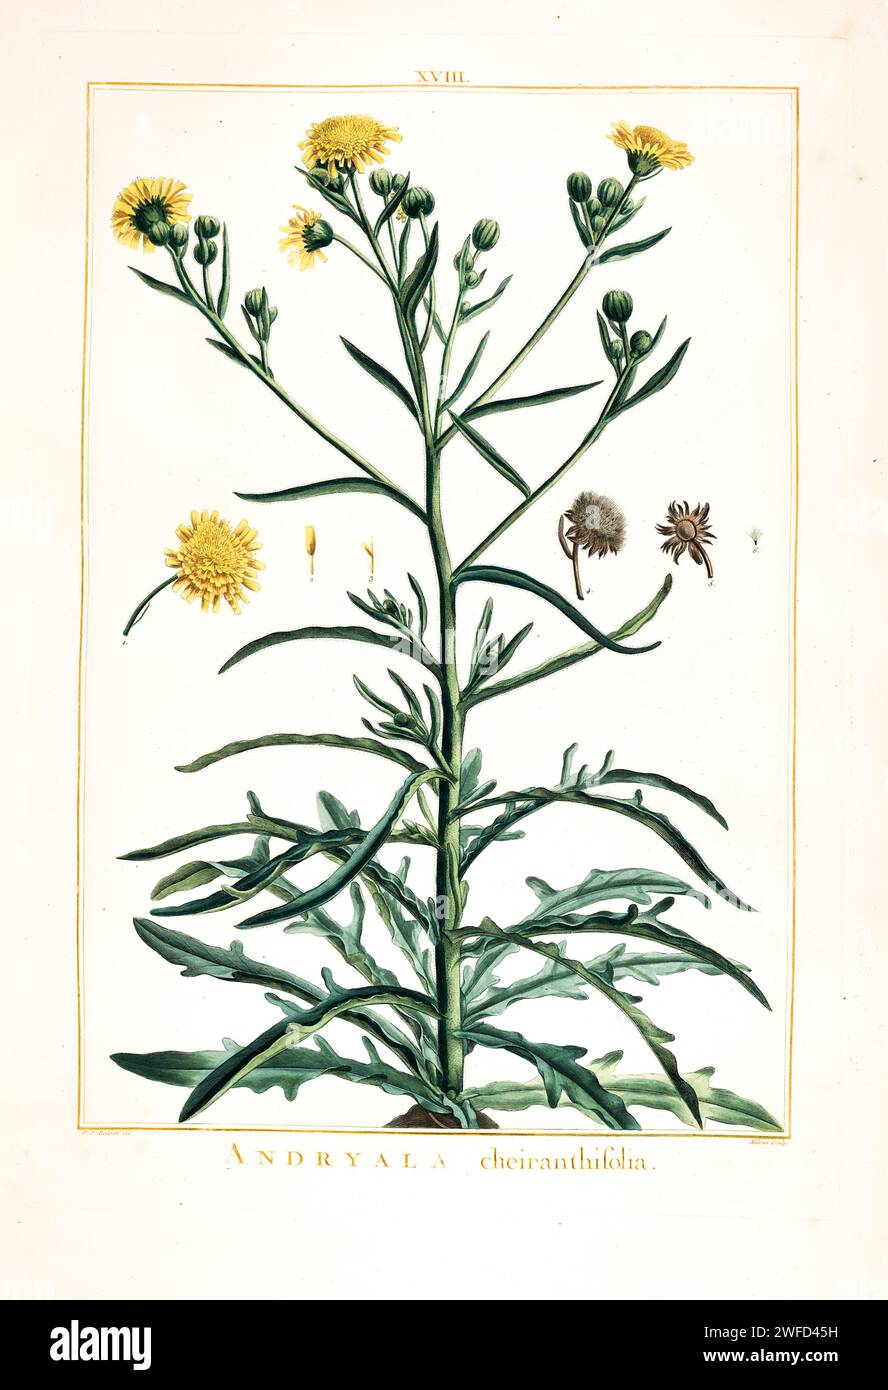 Andryala Cheiranthifolia syn Andryala integrifolia, also known as common Andryala, is a species of flowering plant in the family Asteraceae. Hand Painted by Pierre-Joseph Redouté in 1784 Stock Photo